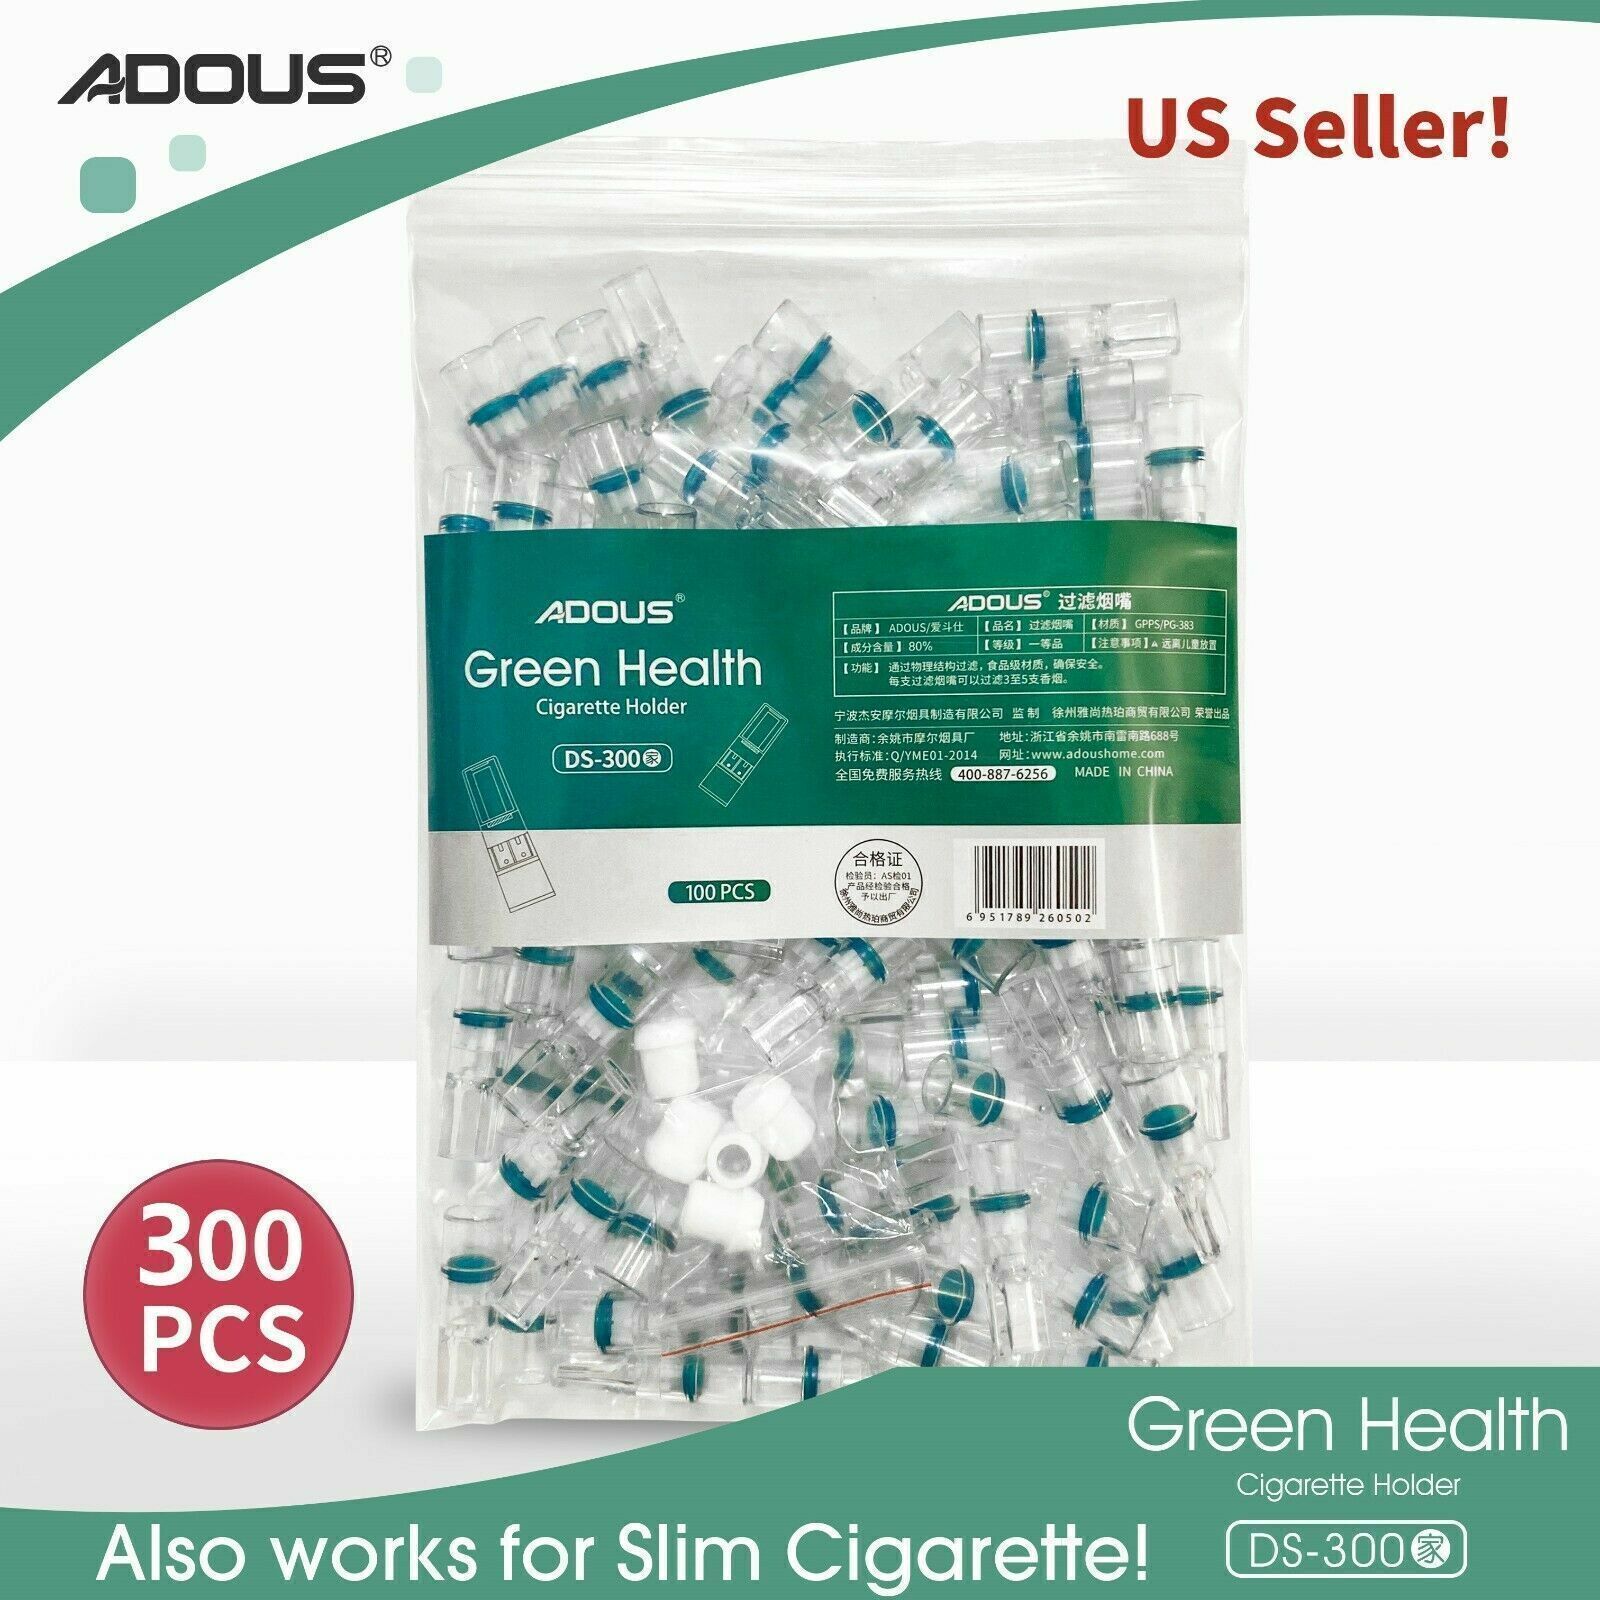 Effective Tar and Nicotine Filters Adous Cigarette Filters Bulk 3-Pack of 100